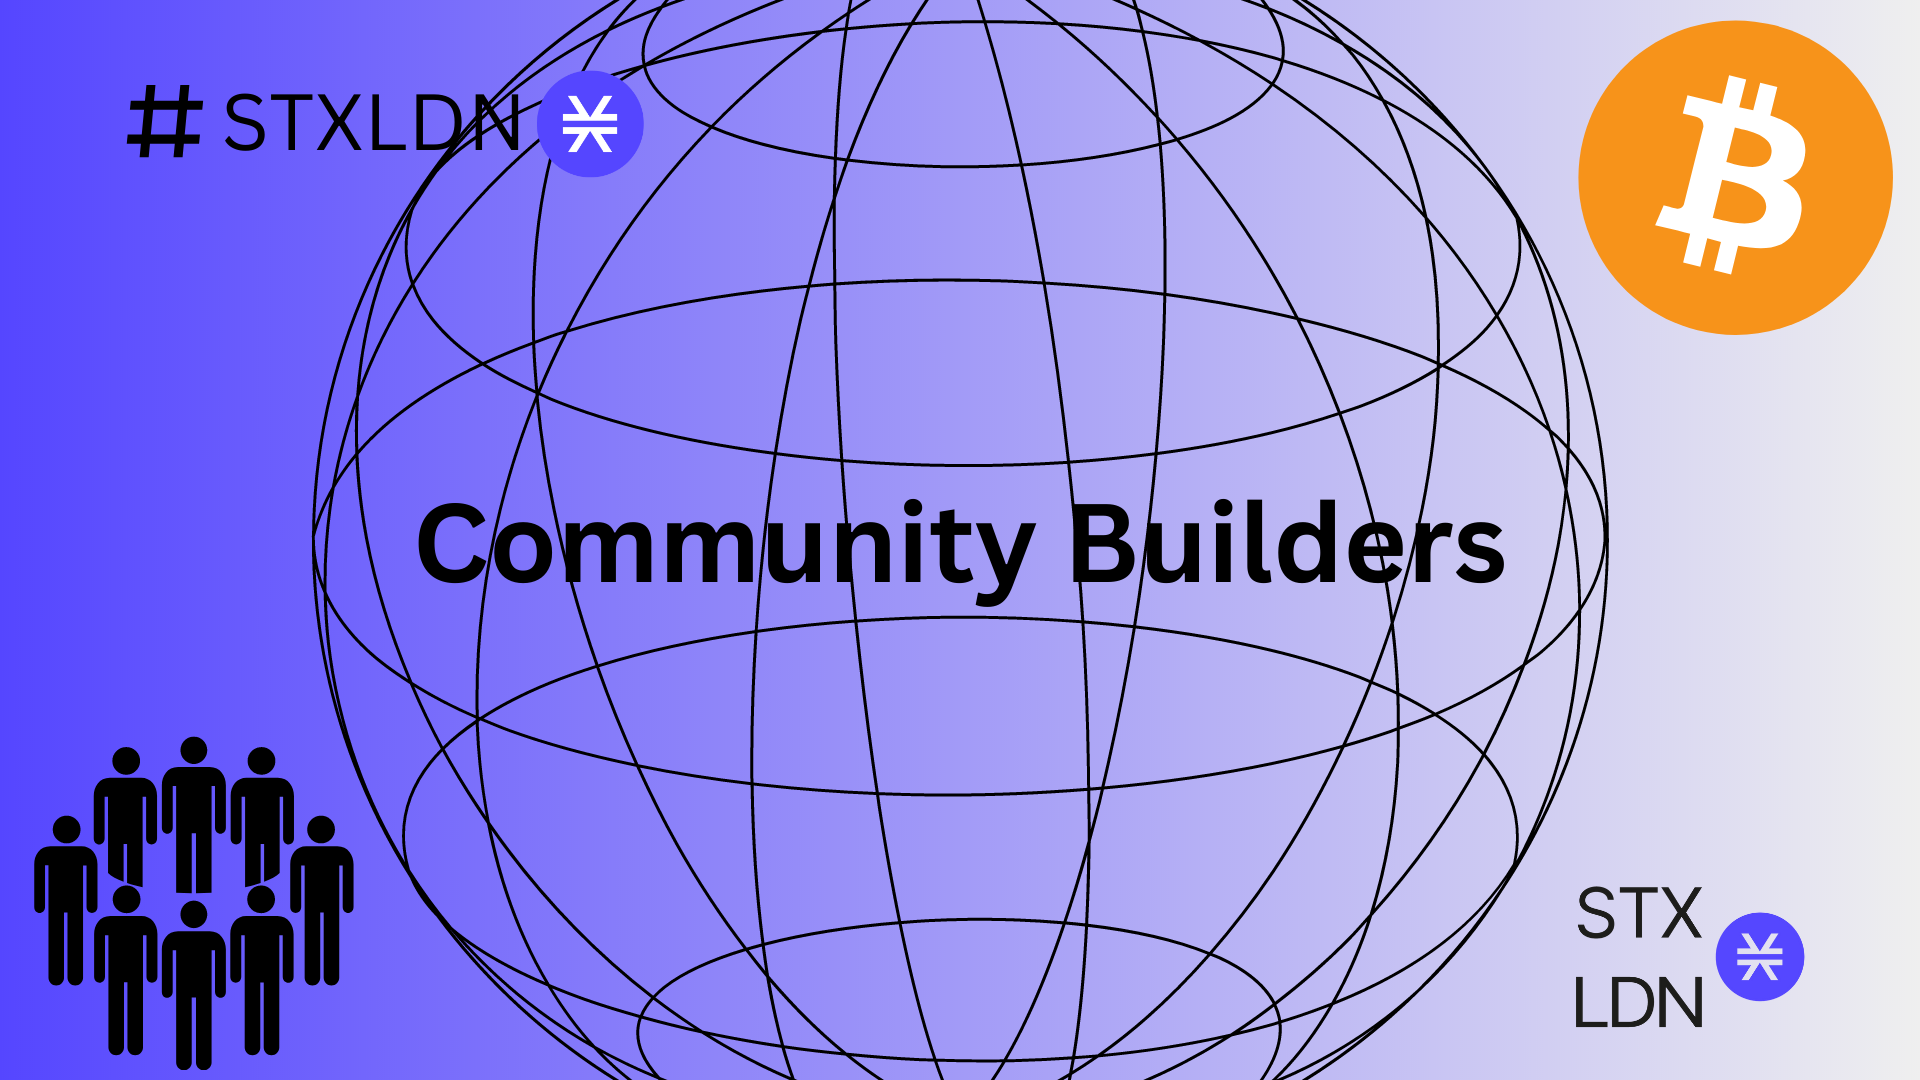 STX:LDN Launches the Community Builders Initiative